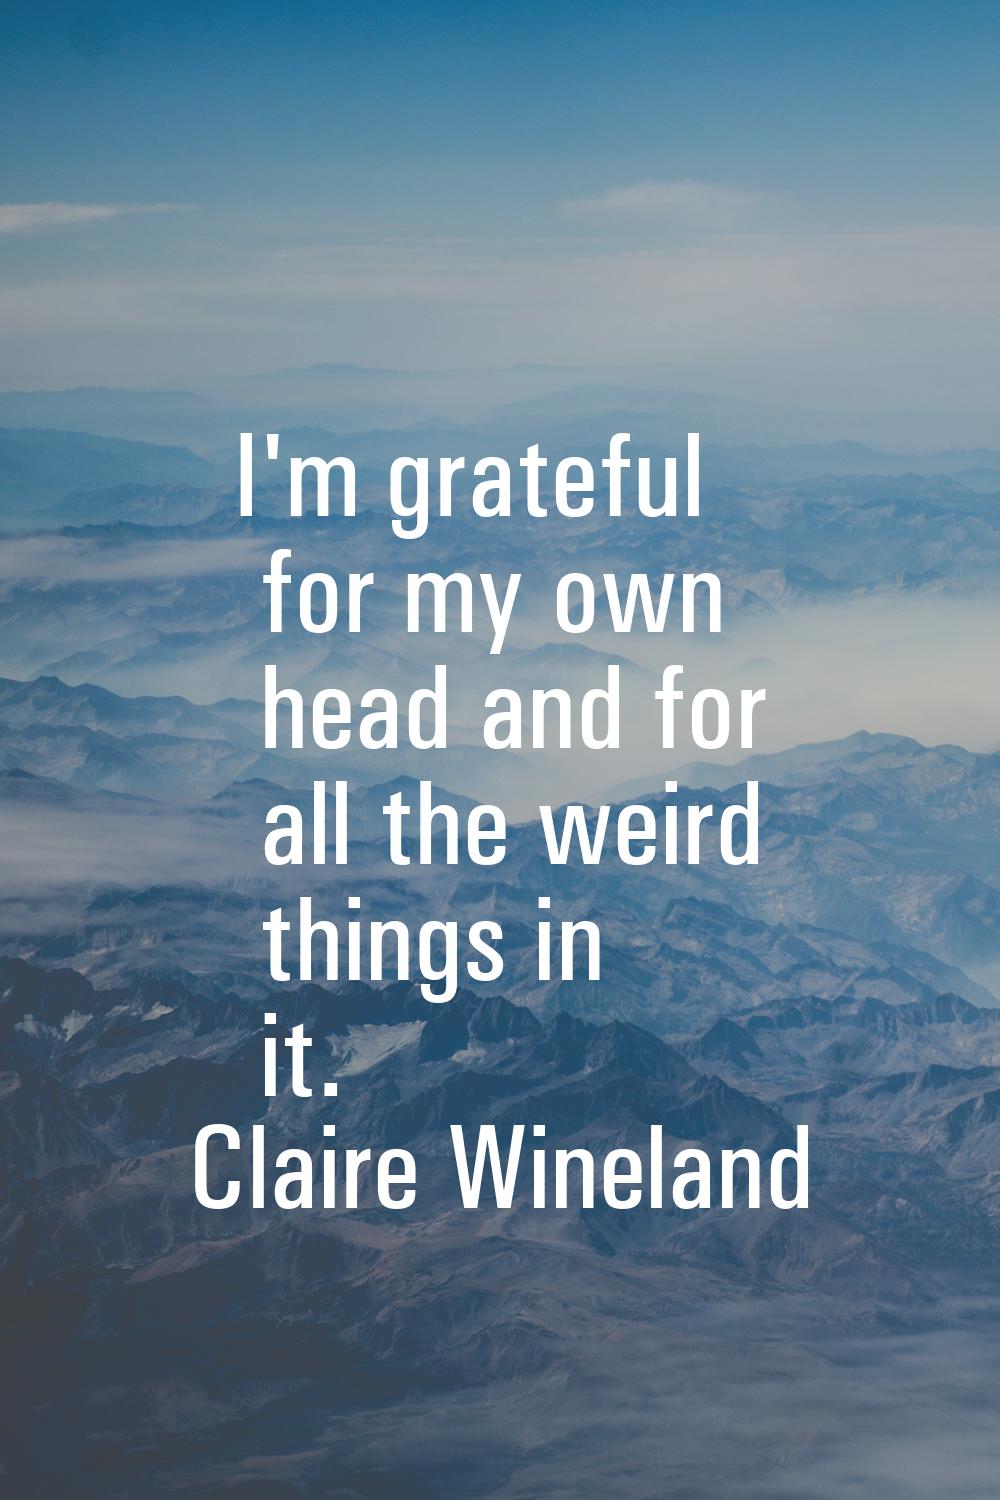 I'm grateful for my own head and for all the weird things in it.